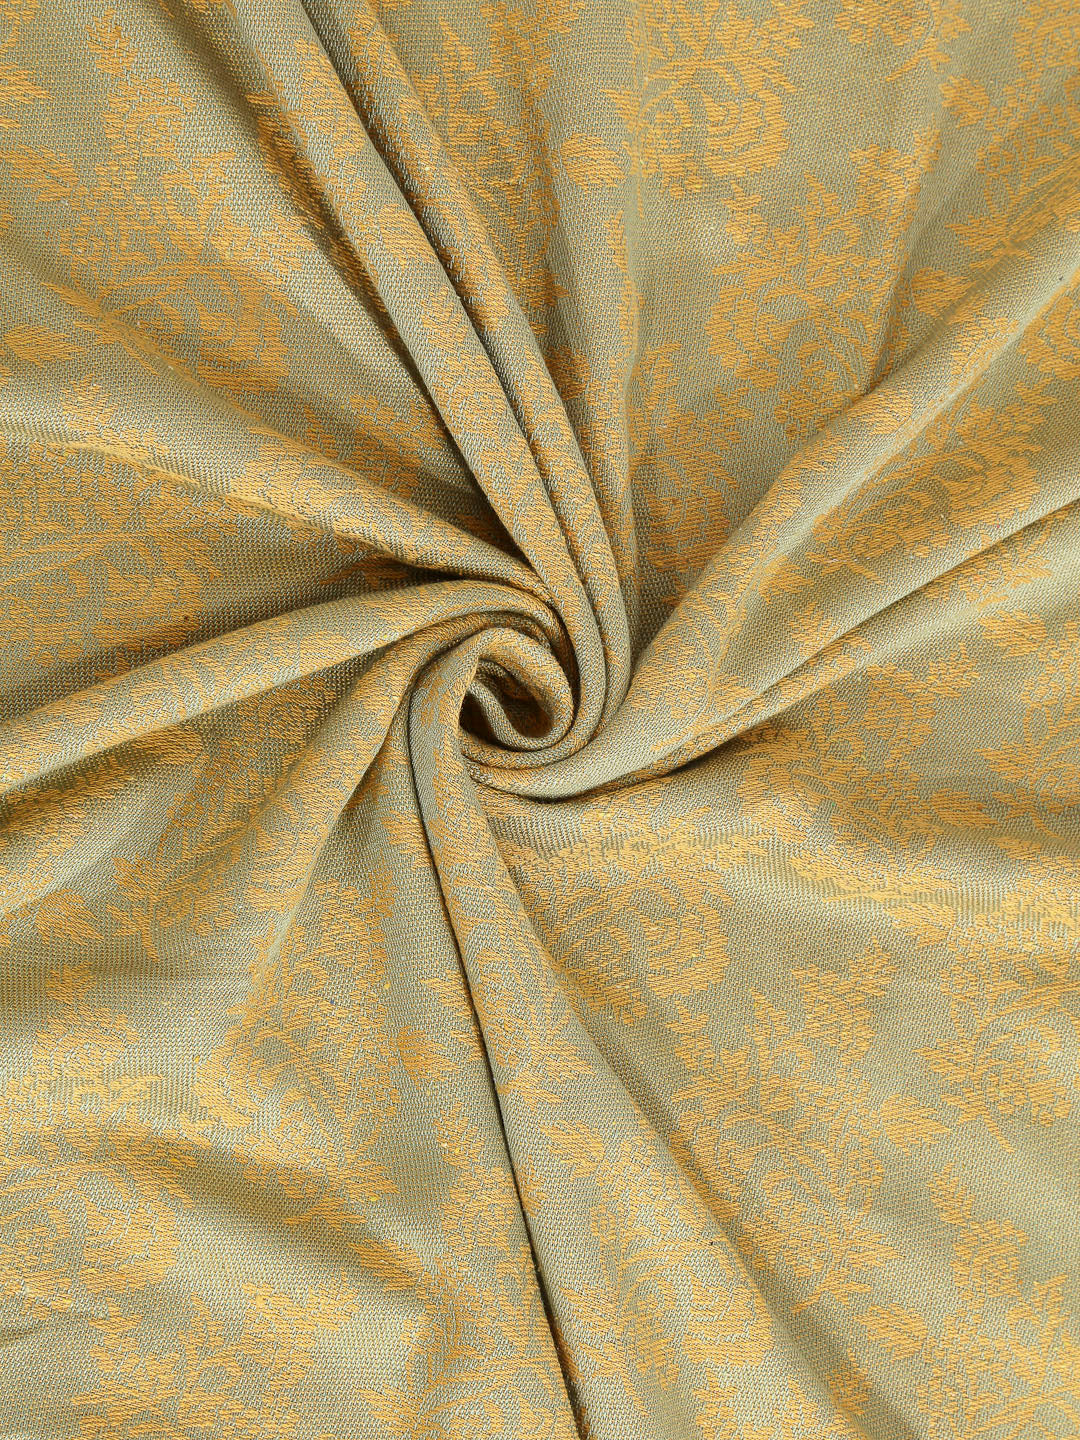 Arrabi Yellow Floral Handwoven Cotton Single Size Bedsheet with 1 Pillow Cover ( 225 X 150 cm)